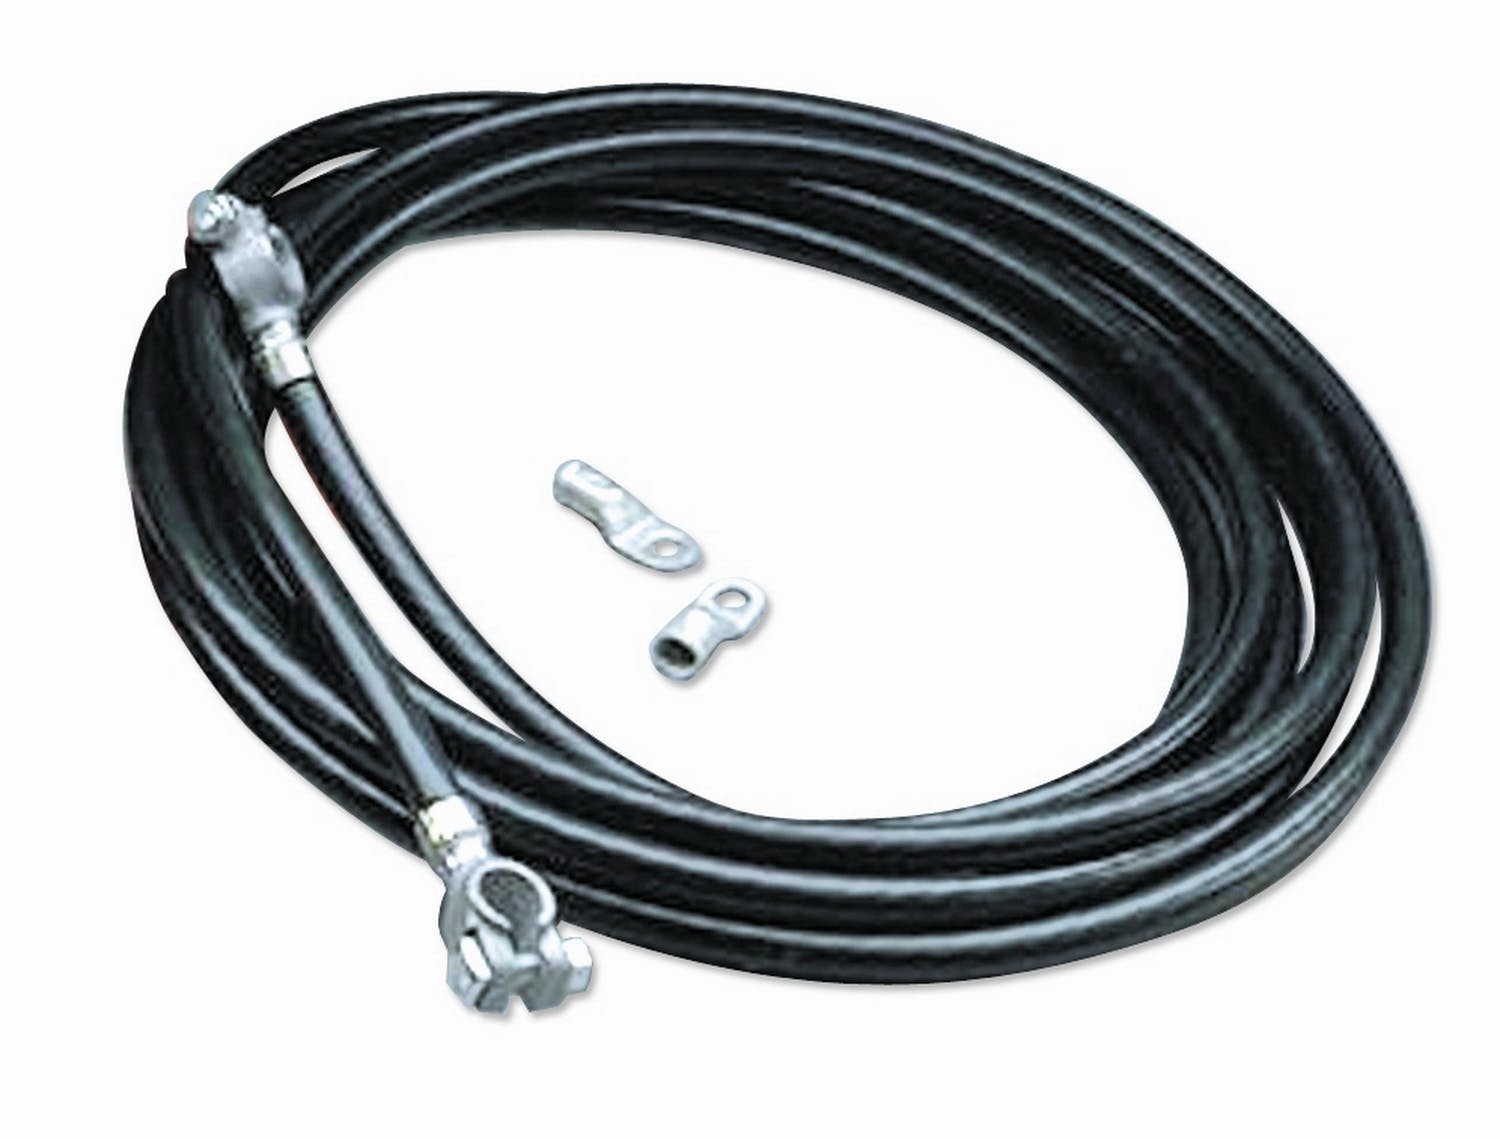 Taylor Cable Products 21543 1/0 ga black 8ft Battery Cable Kit